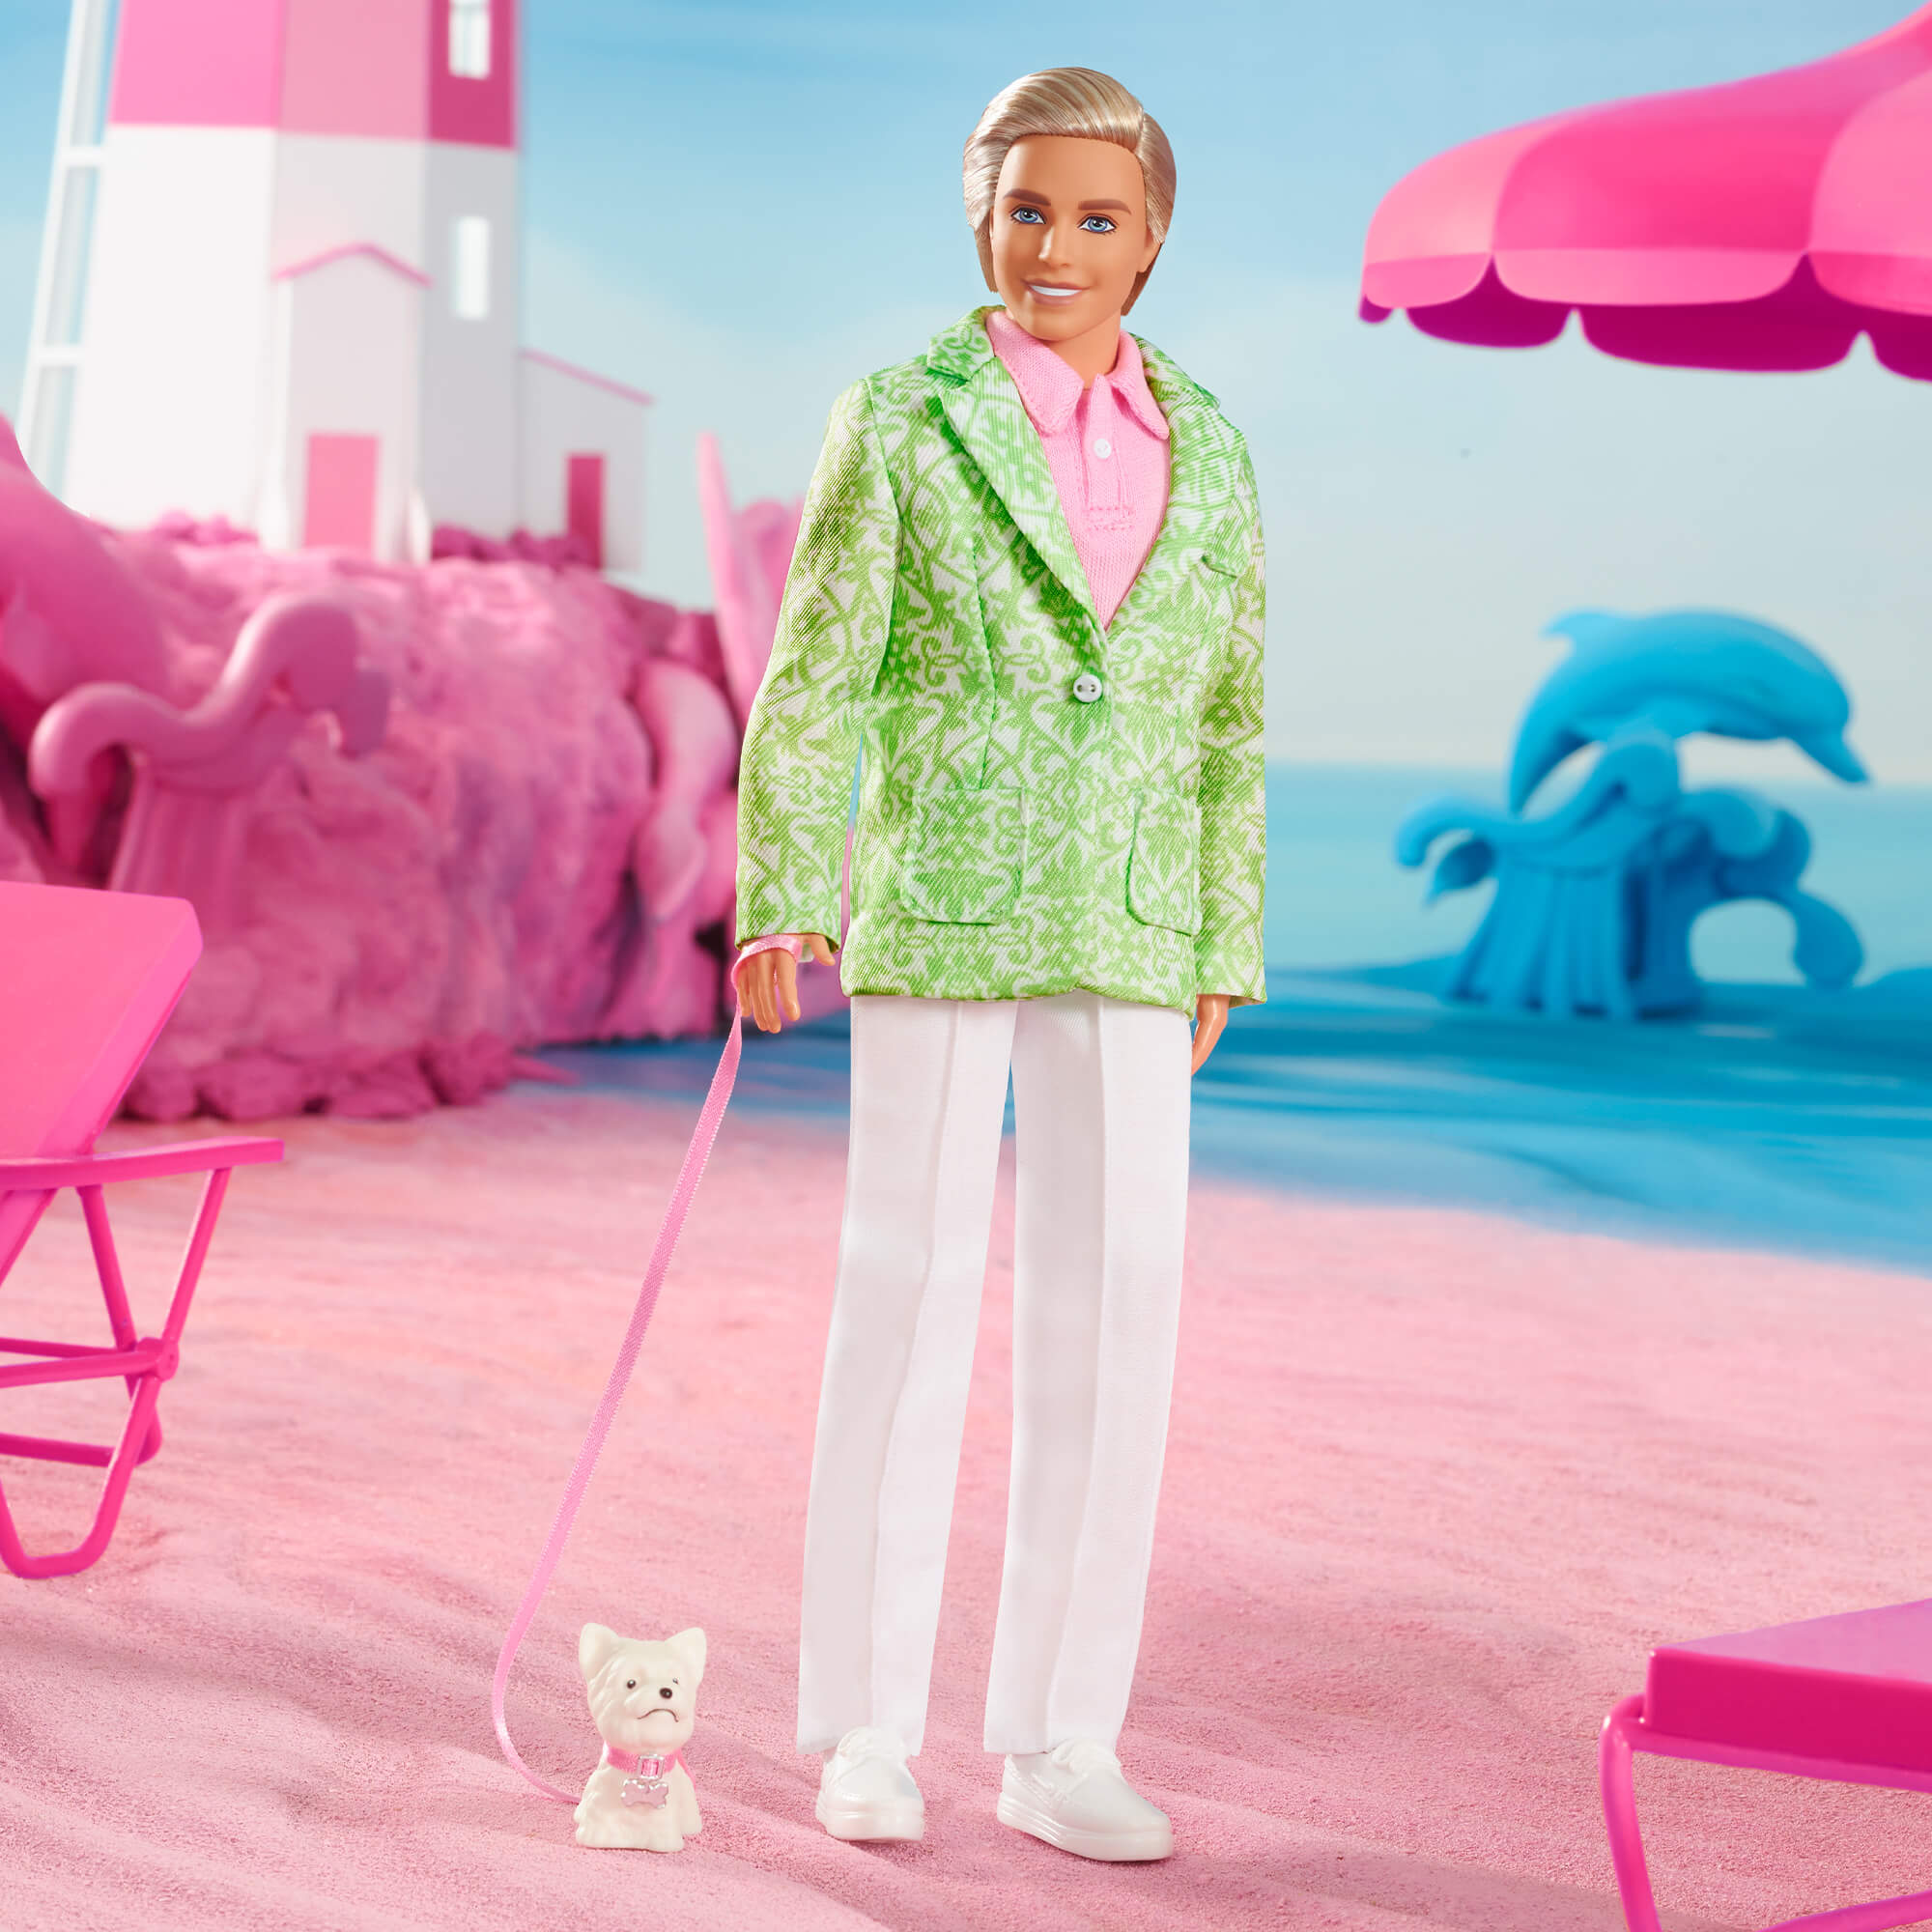 Premium Photo  Barbie Ken Doll in Pink Outfit